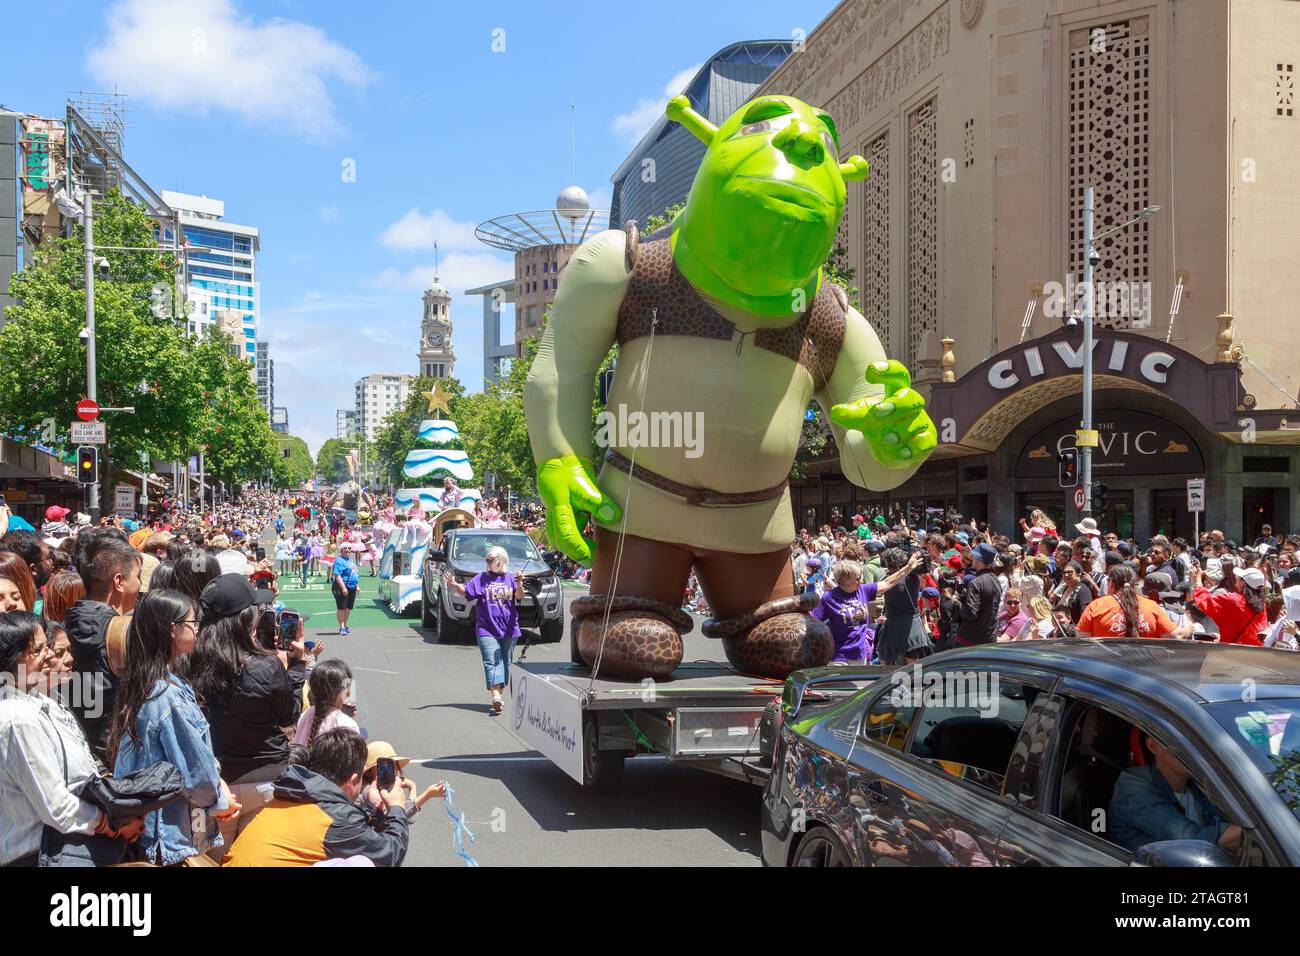 A Shrek balloon at the Farmers Christmas Parade in Queen Street, Auckland, New Zealand Stock Photo